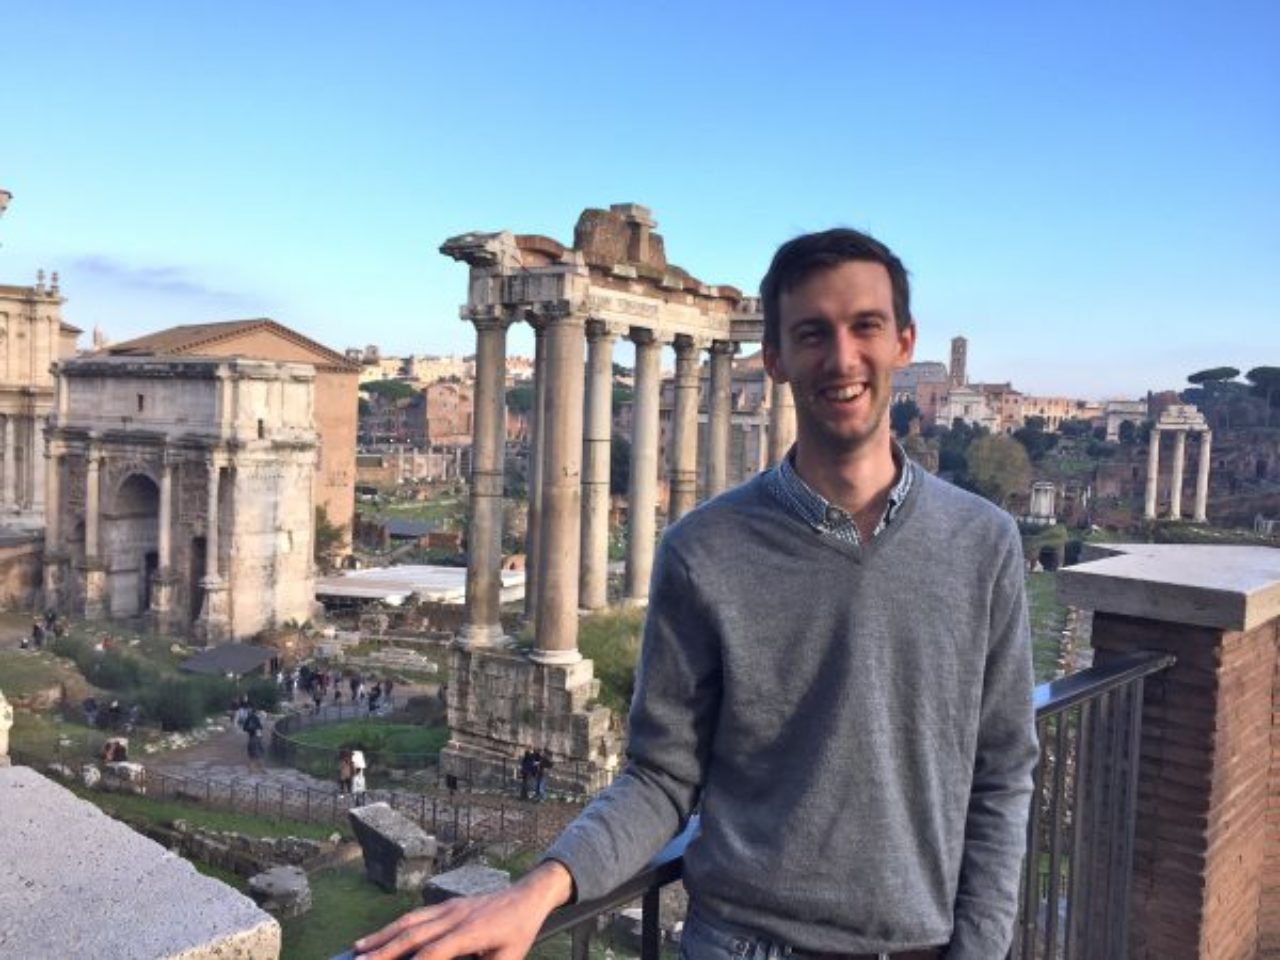 The Roman Forum from the Capitoline